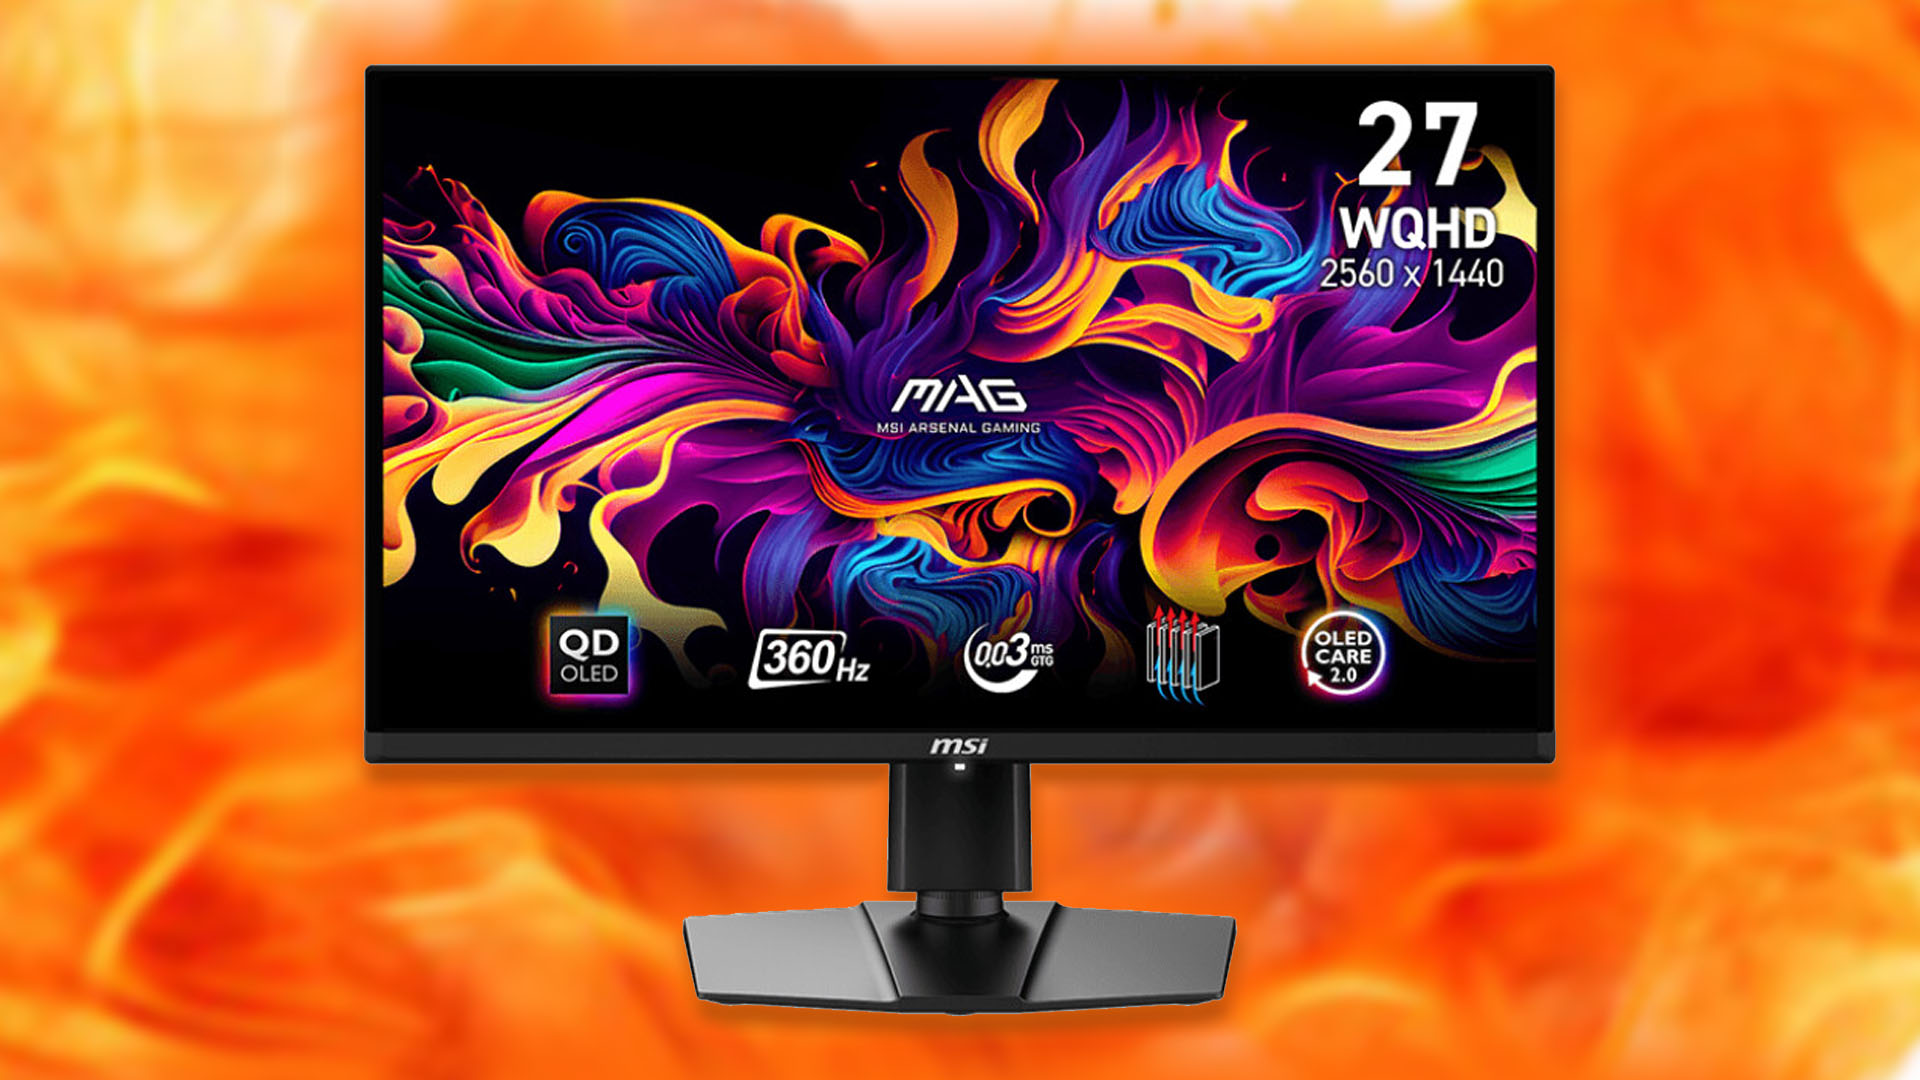 MSI ups the ante on Asus with its OLED gaming monitor offering